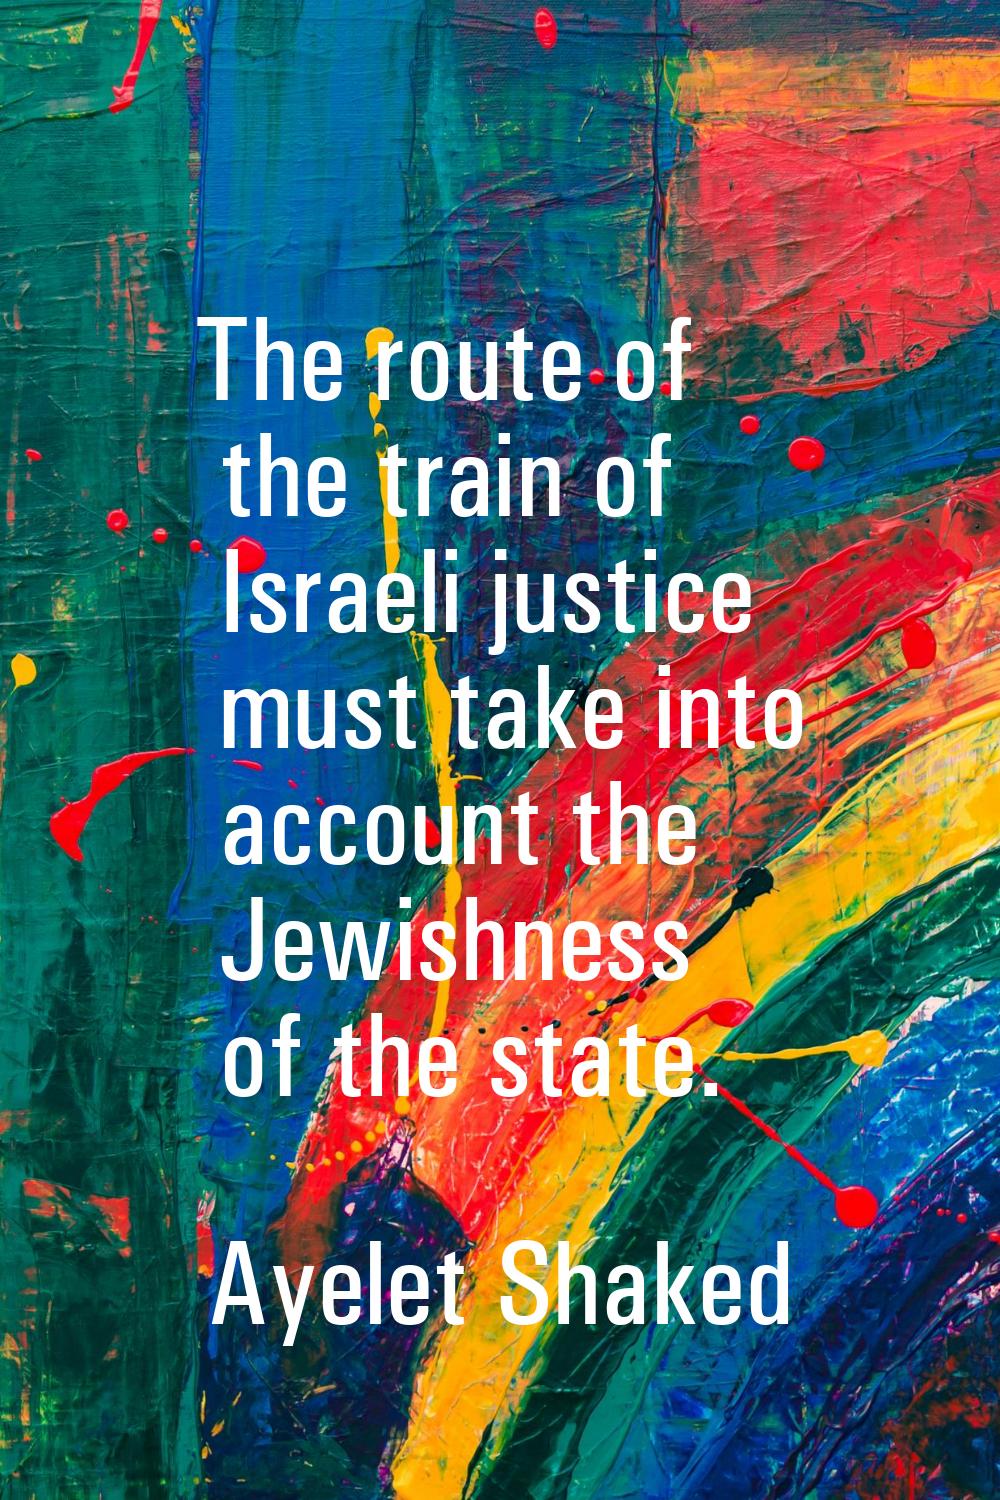 The route of the train of Israeli justice must take into account the Jewishness of the state.